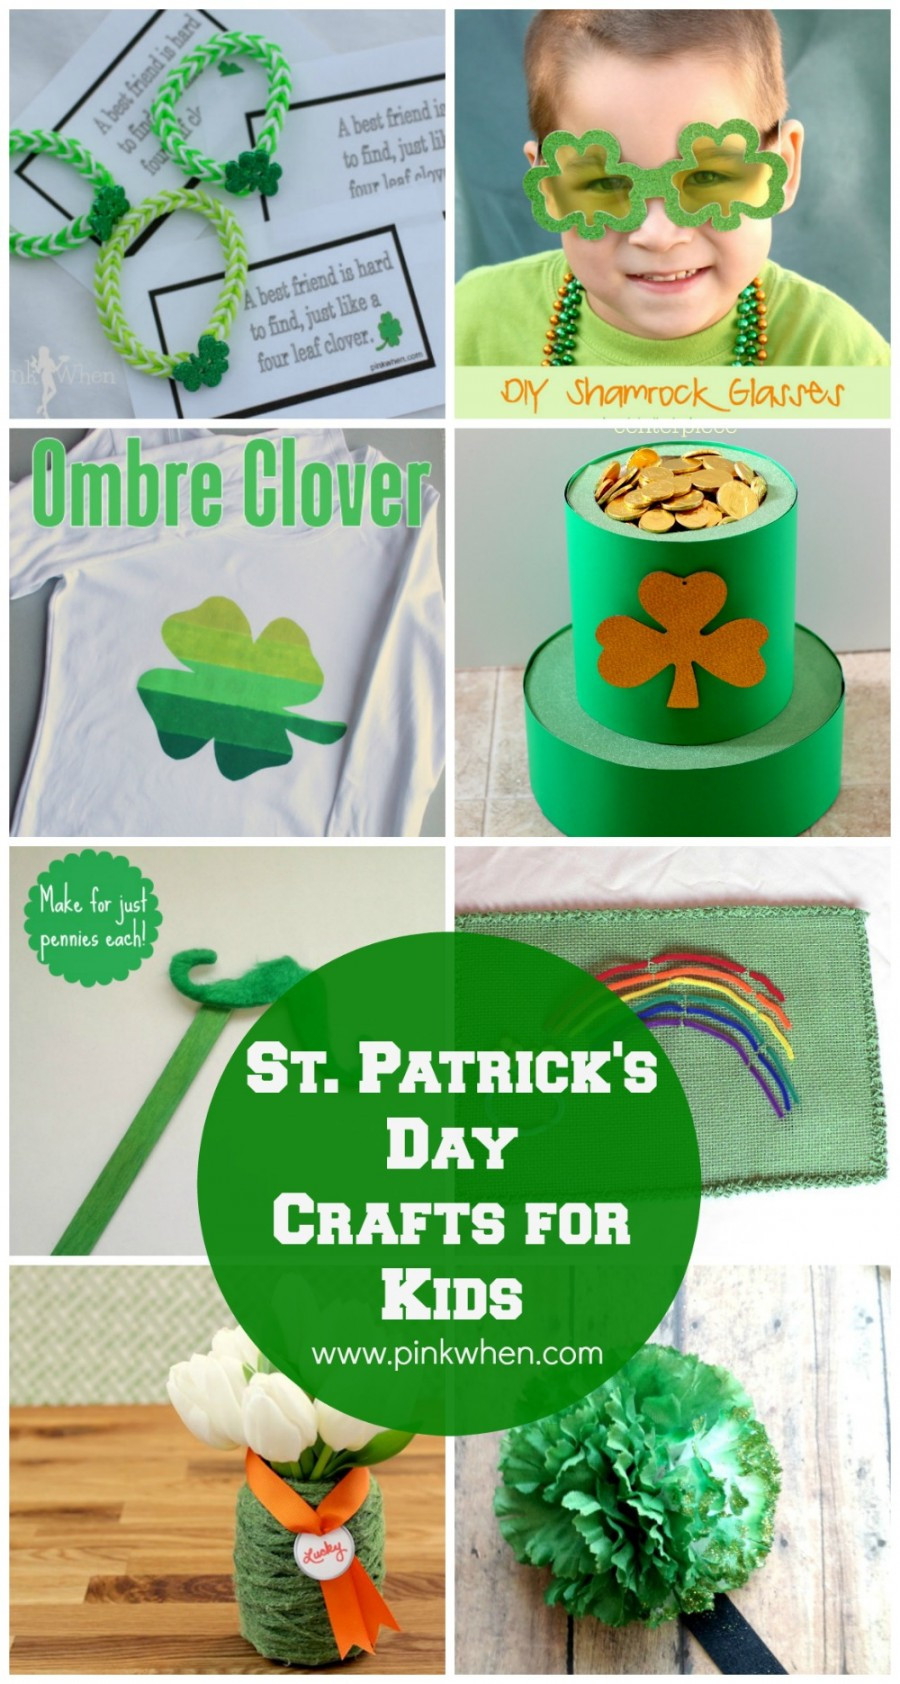 St. Patrick's Day Crafts For Kids
 10 St Patrick s Day Crafts for Kids PinkWhen